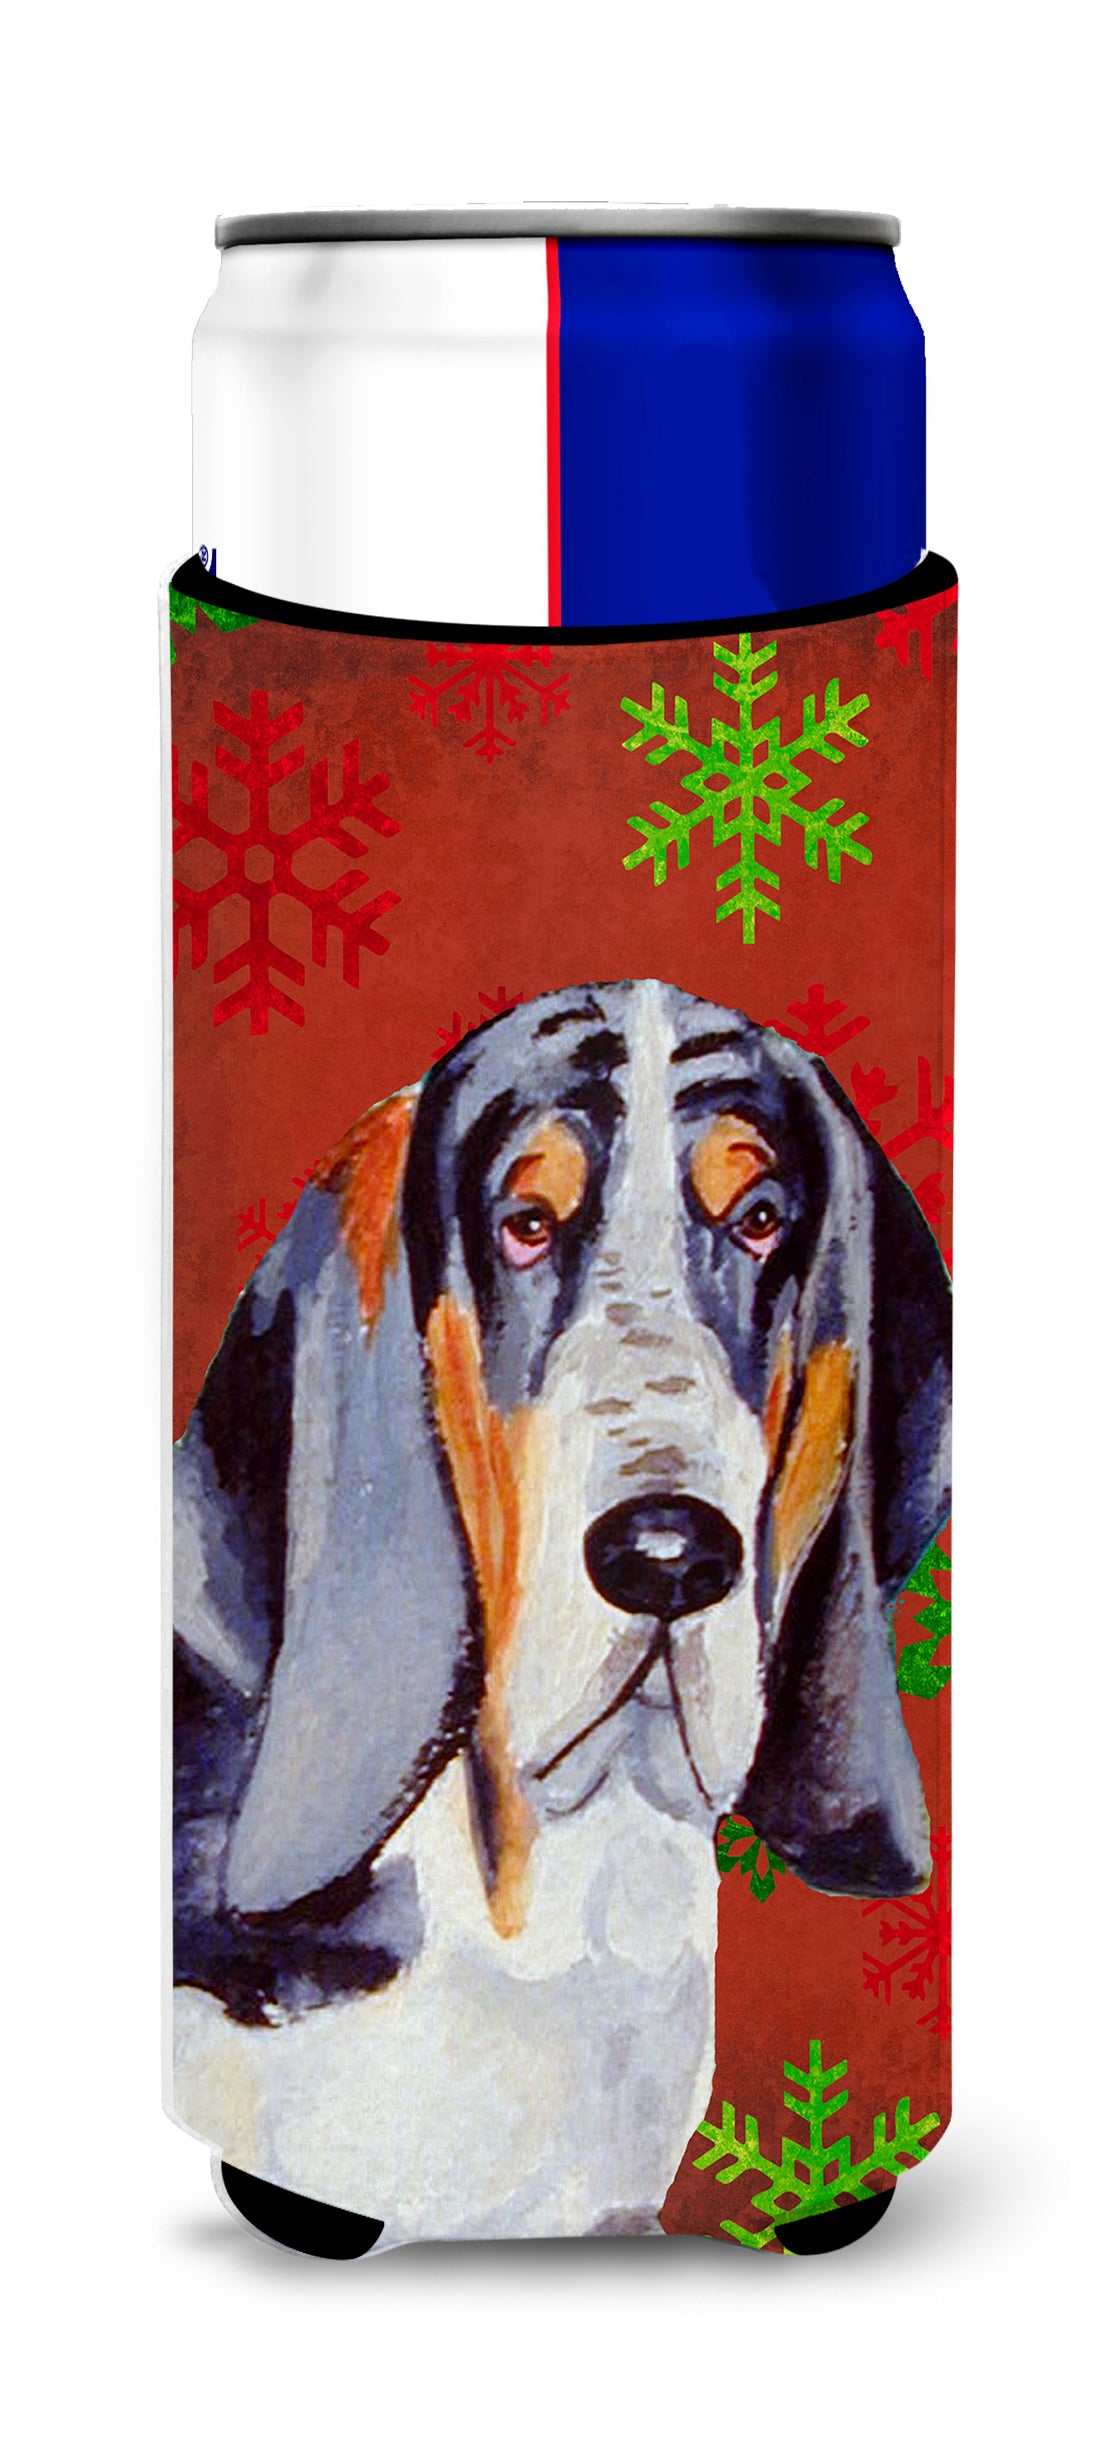 Basset Hound Red and Green Snowflakes Holiday Christmas Ultra Beverage Insulators for slim cans LH9327MUK.